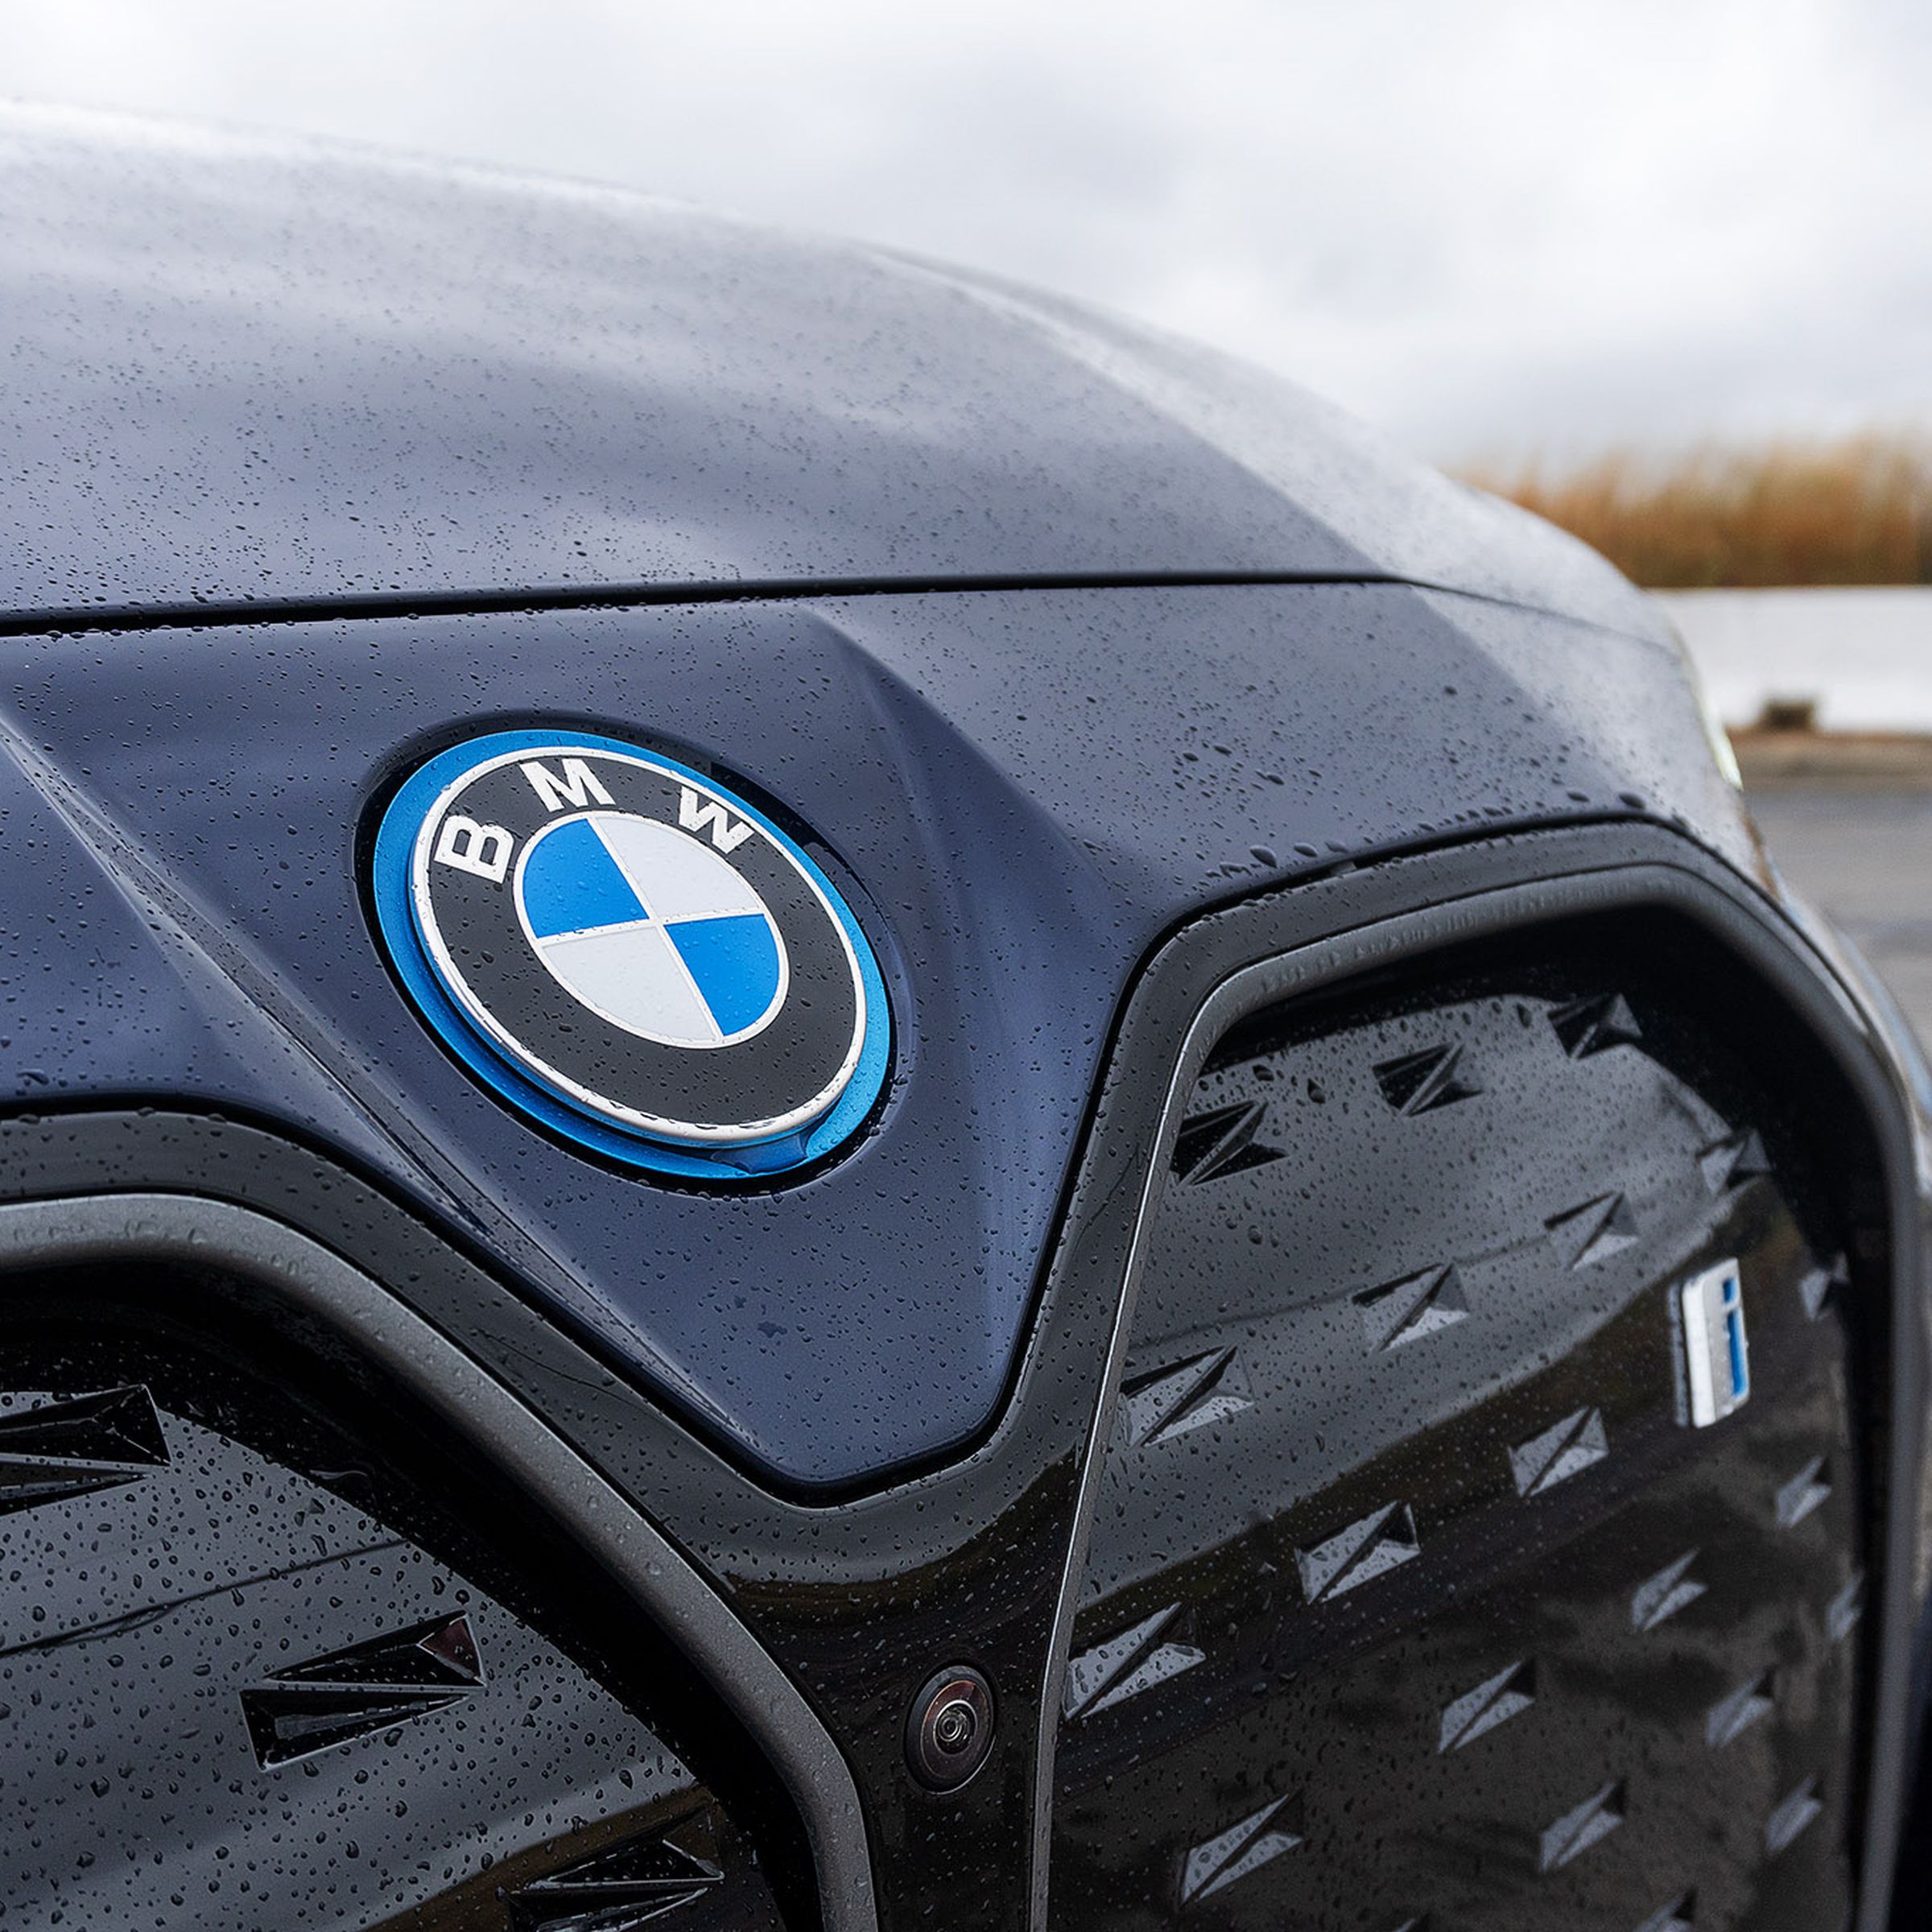 A BMW logo on the front of a vehicle